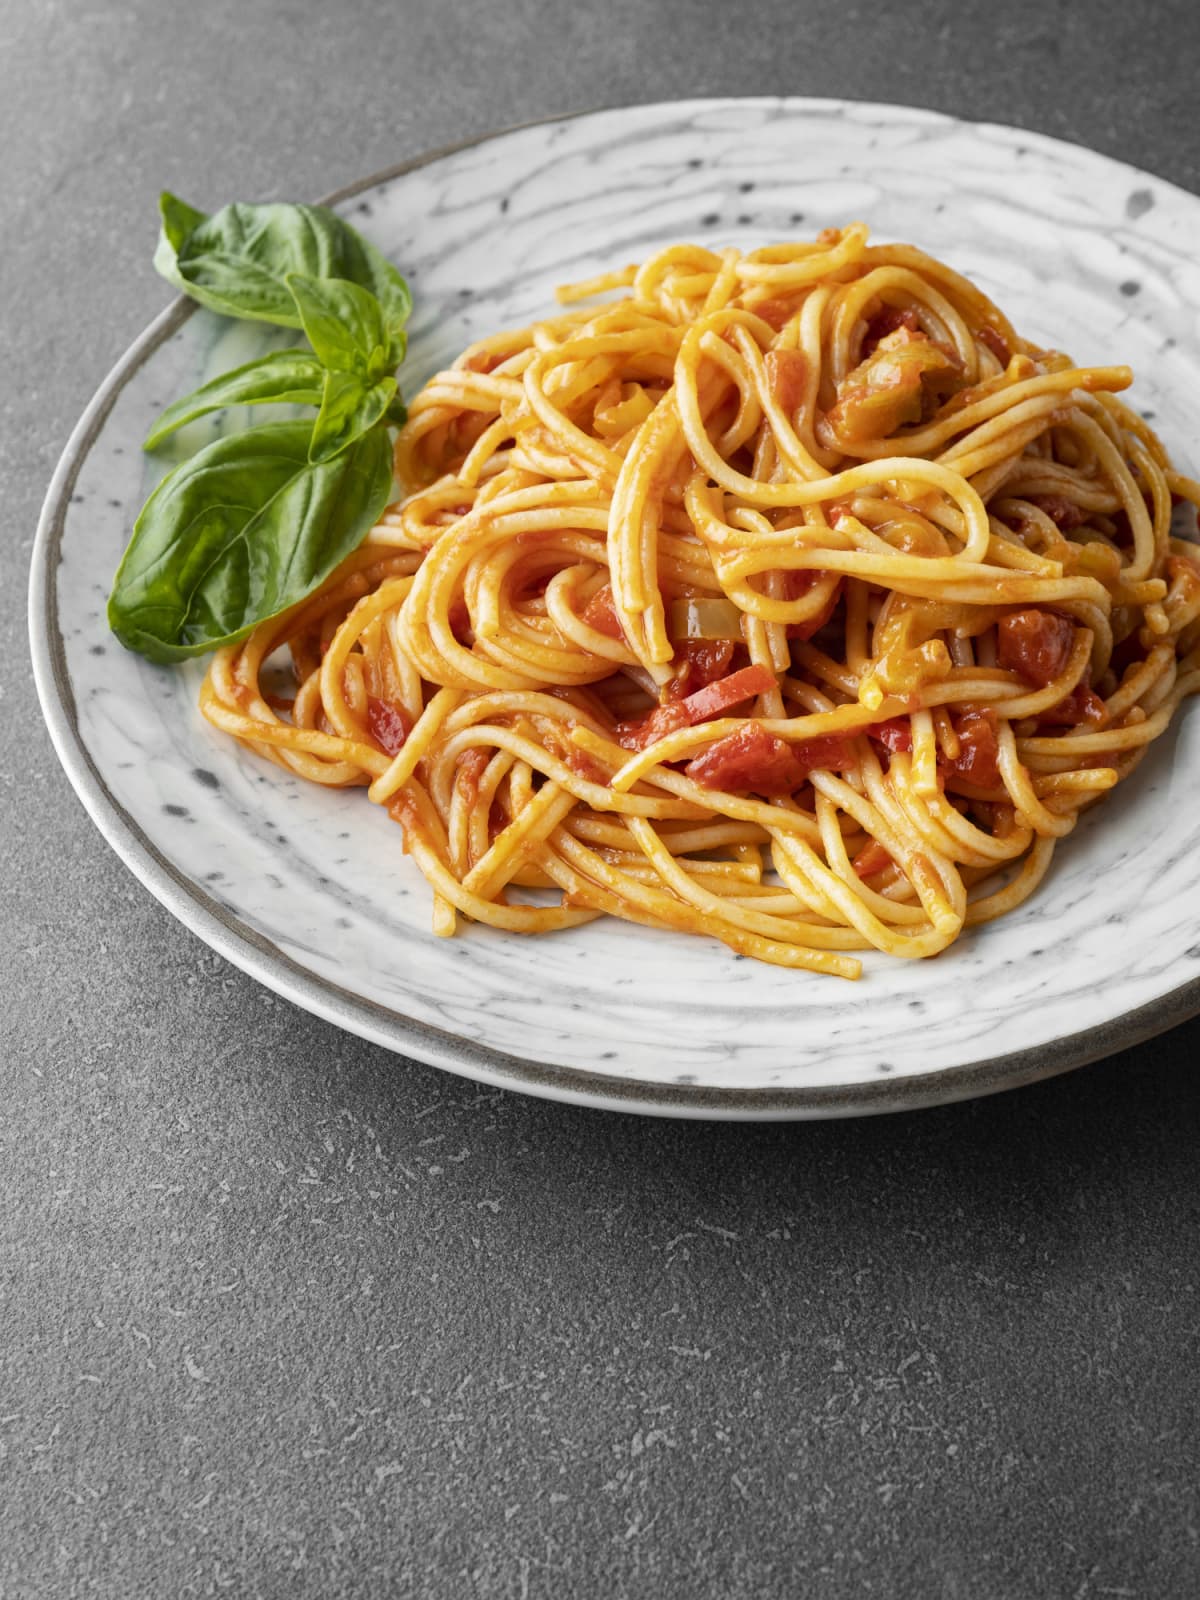 Spaghetti with tomato sauce on a plate